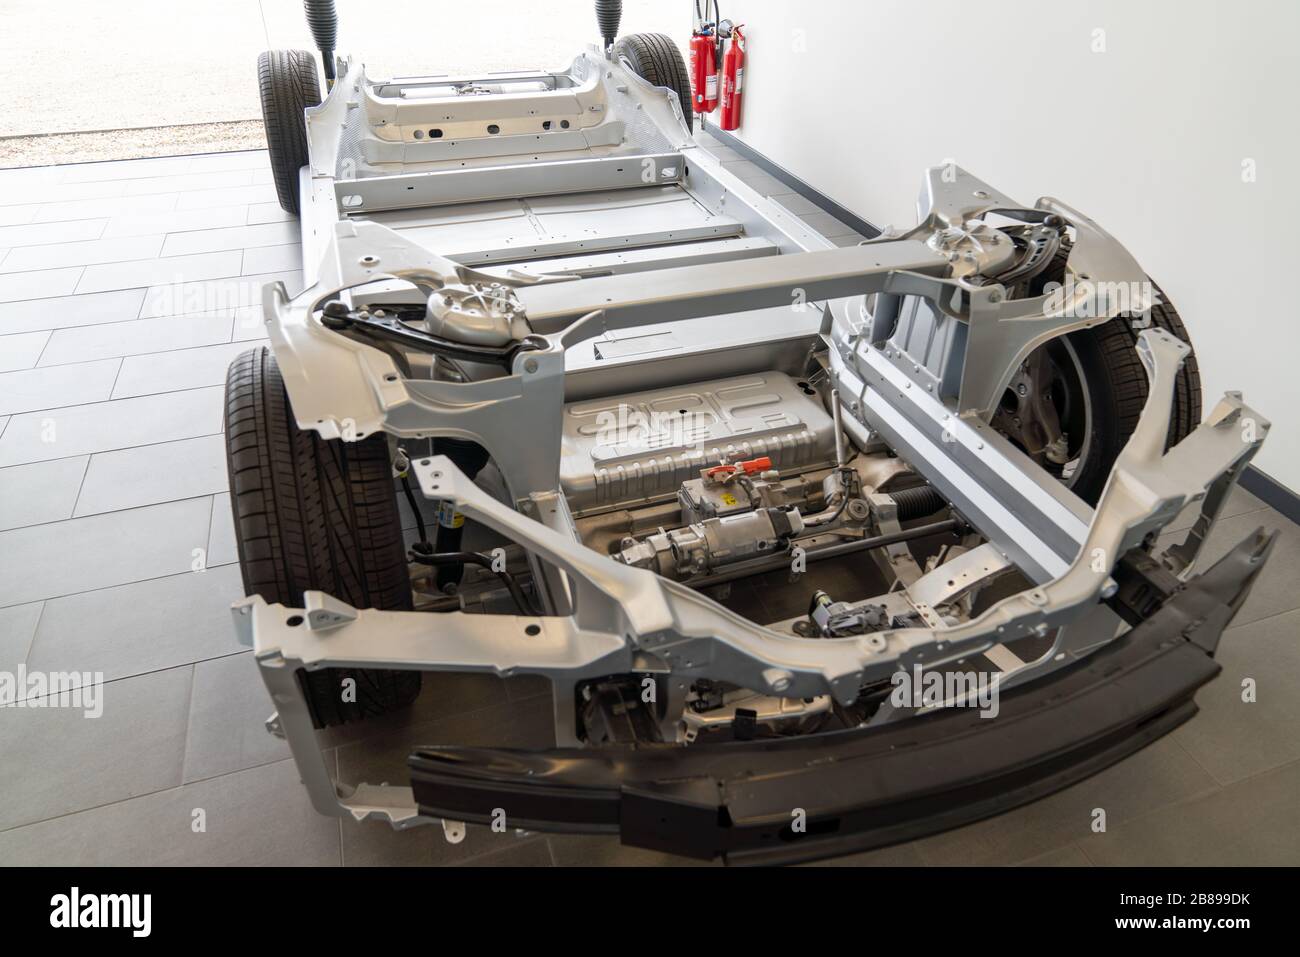 Bordeaux , Aquitaine / France - 11 13 2019 : tesla motor engine detail model s chassis real in store showroom dealership Stock Photo